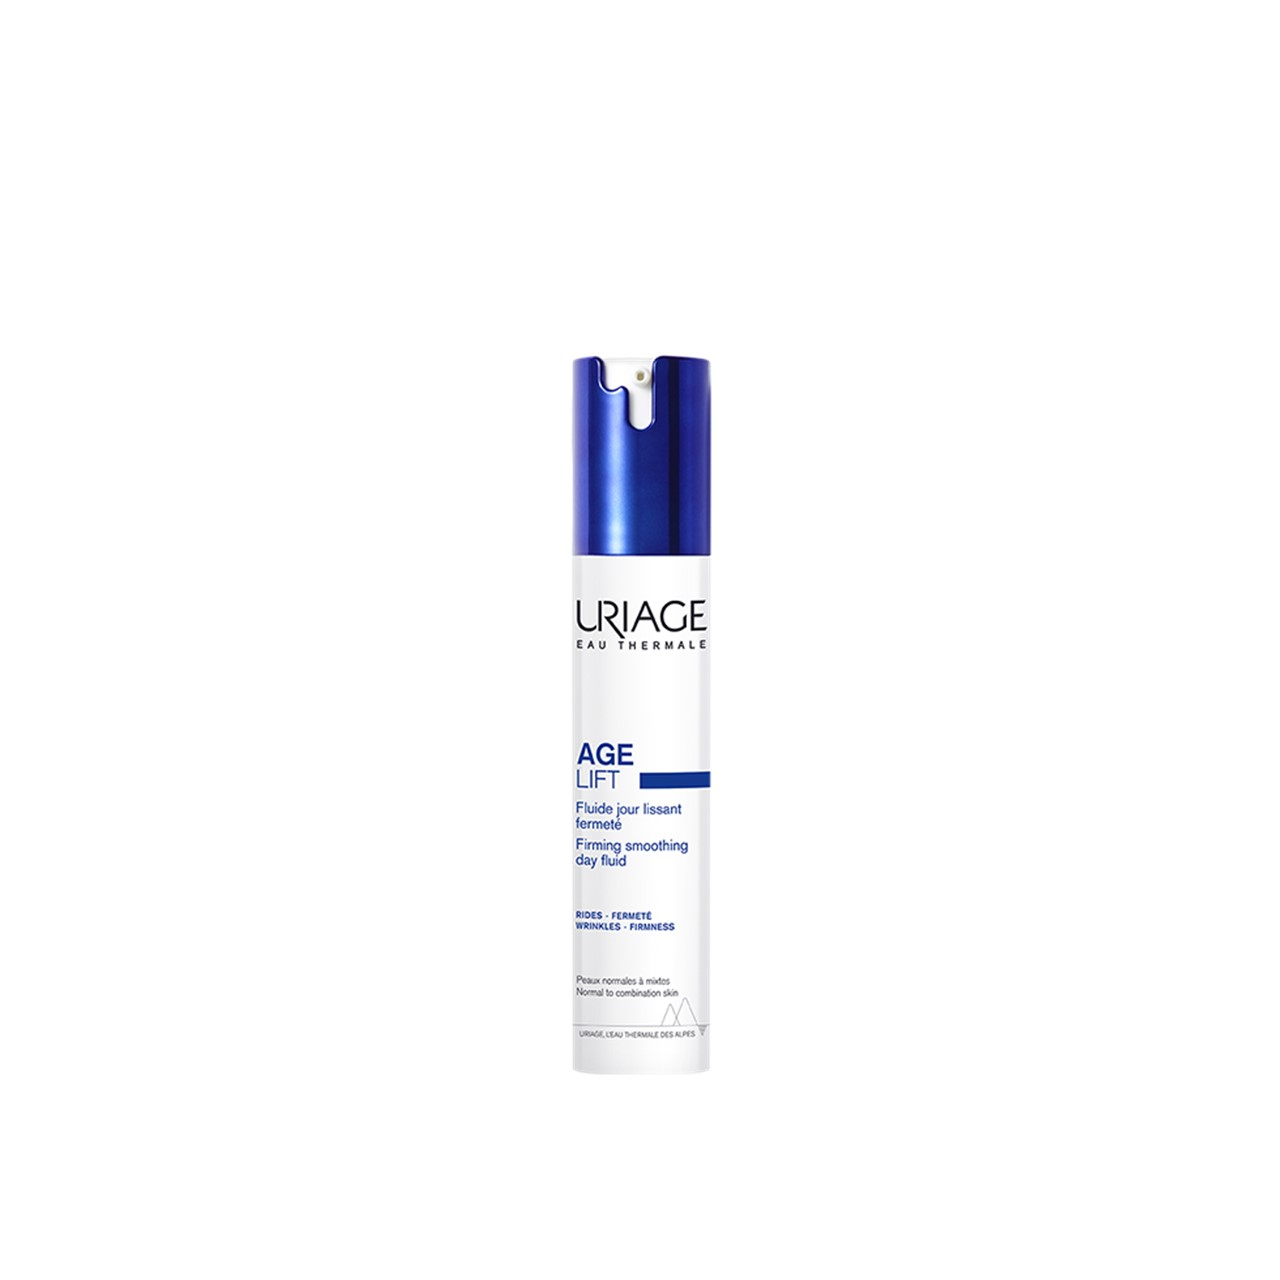 Uriage Age Lift Firming Smoothing Day Fluid 40ml (1.35 fl oz)